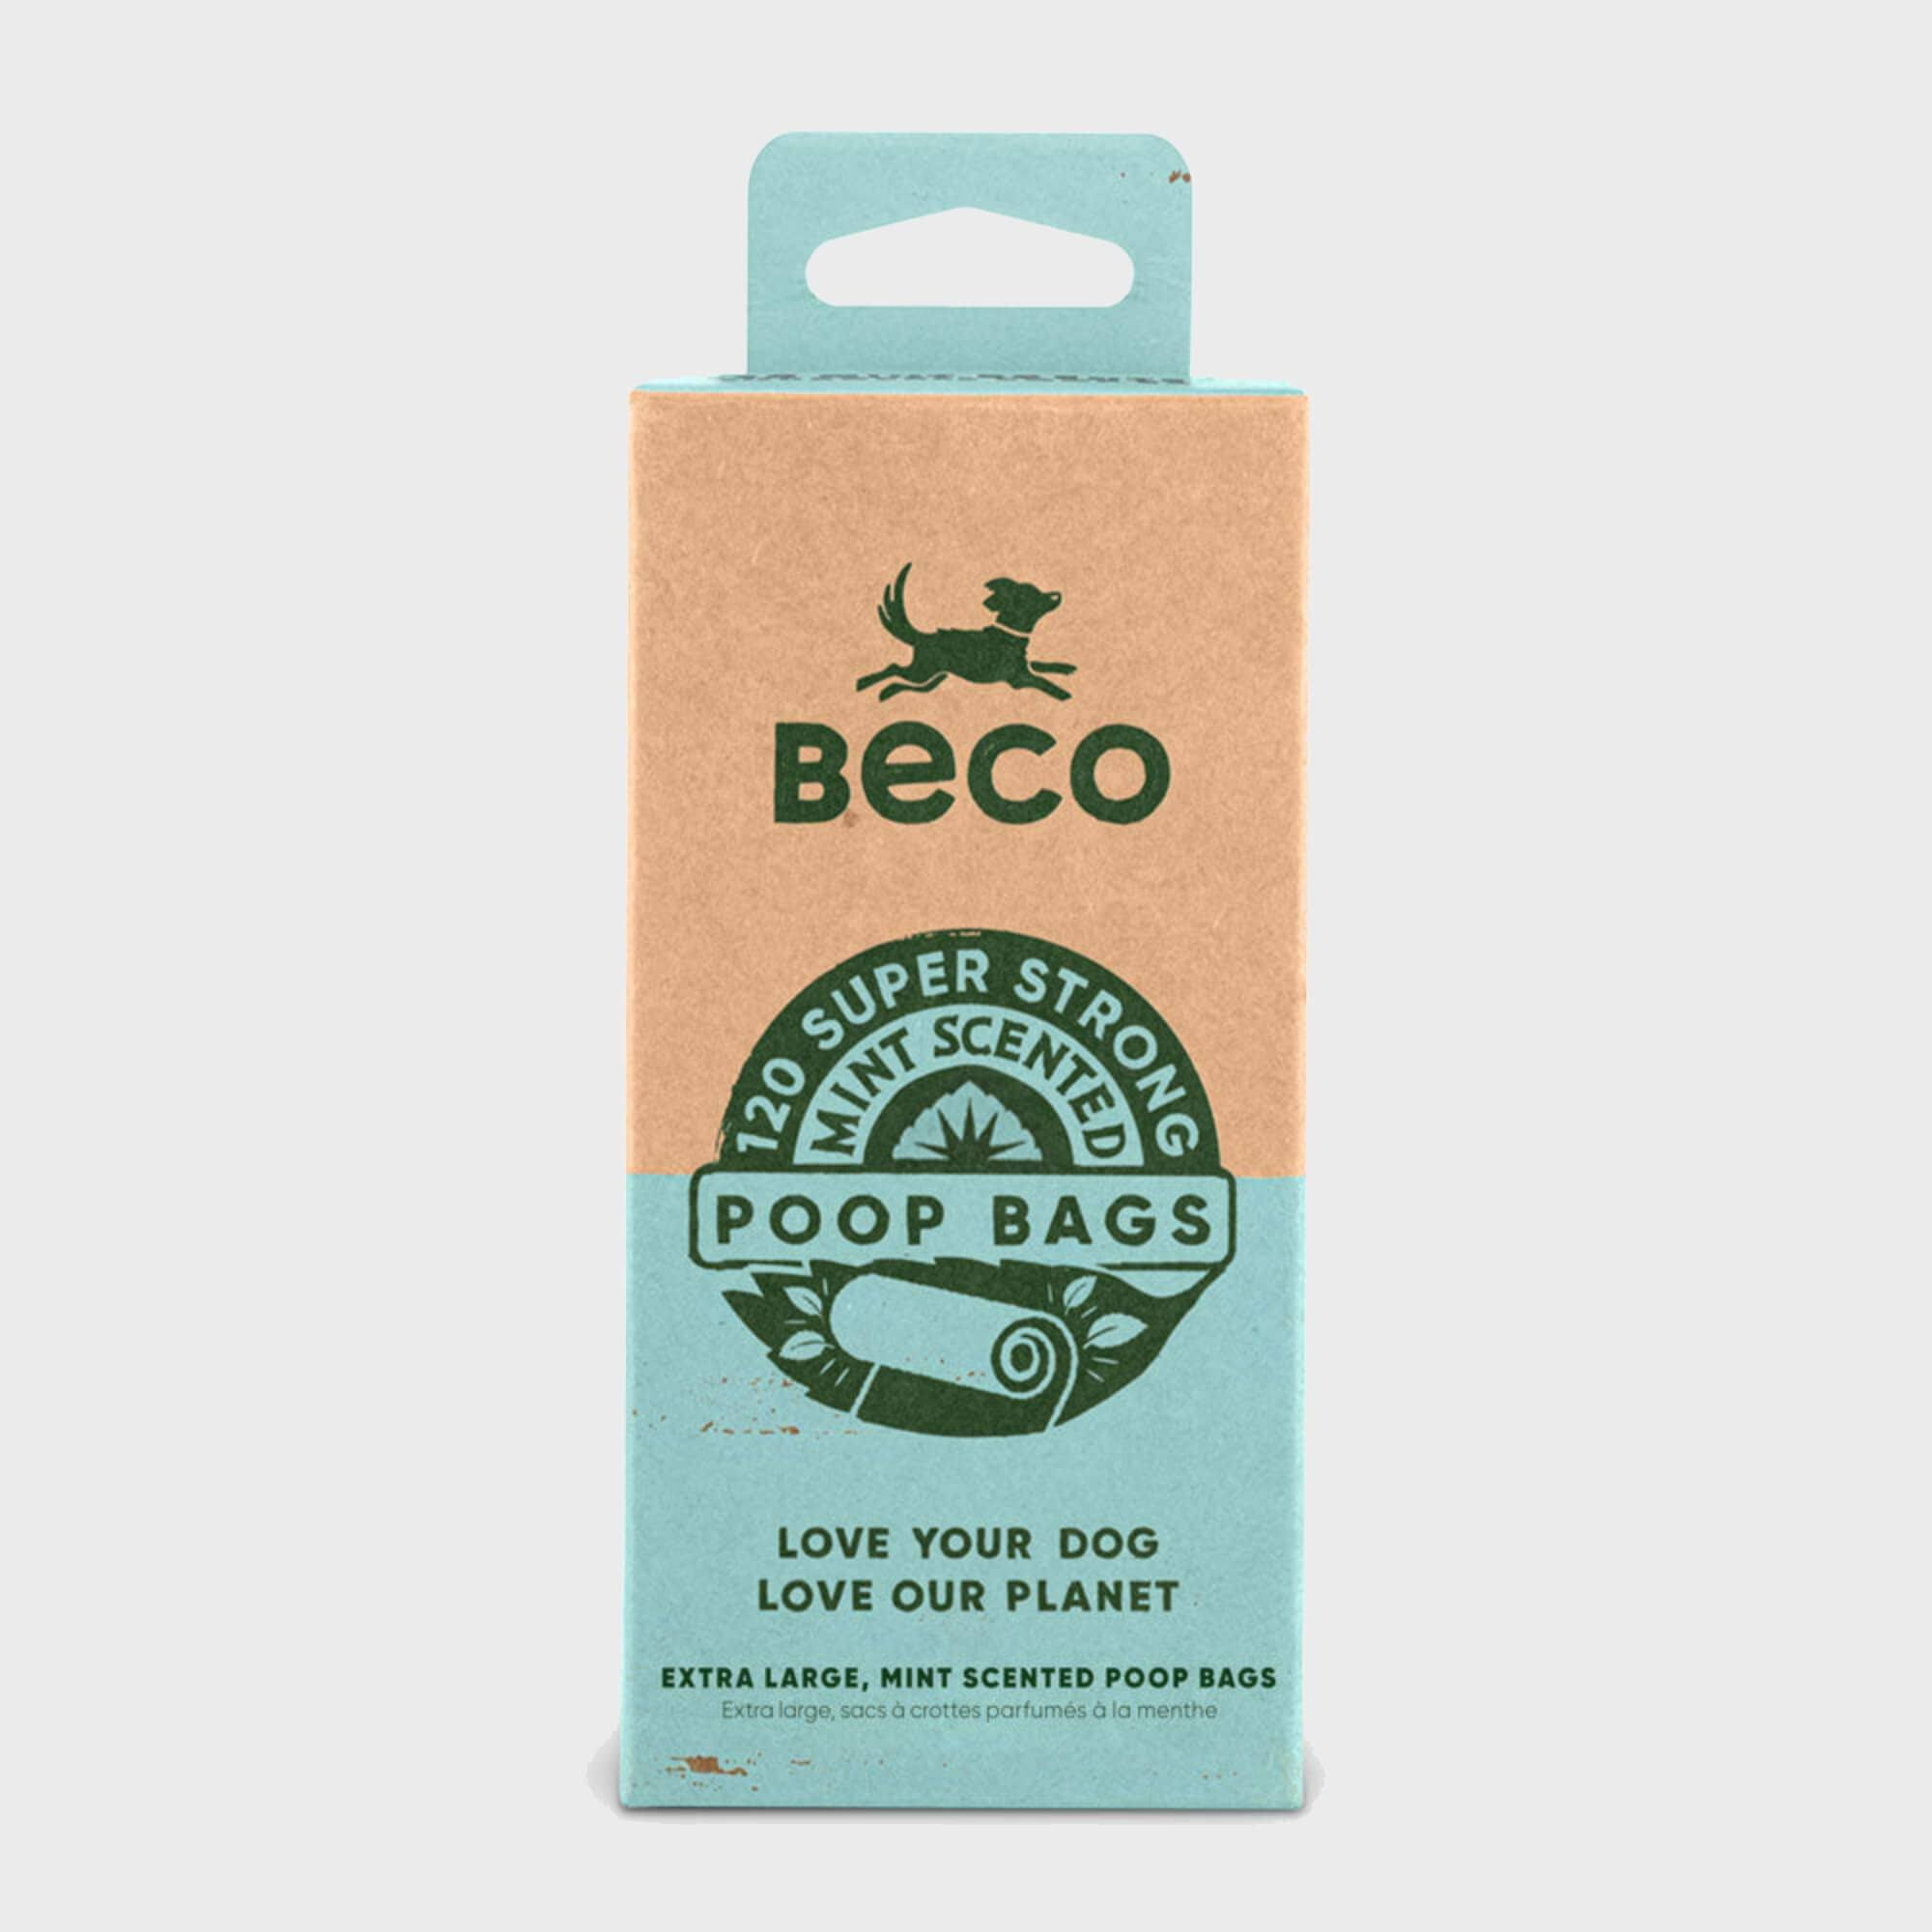 Beco Bags Degradable Poop Bags - Mint Scented, 120ct